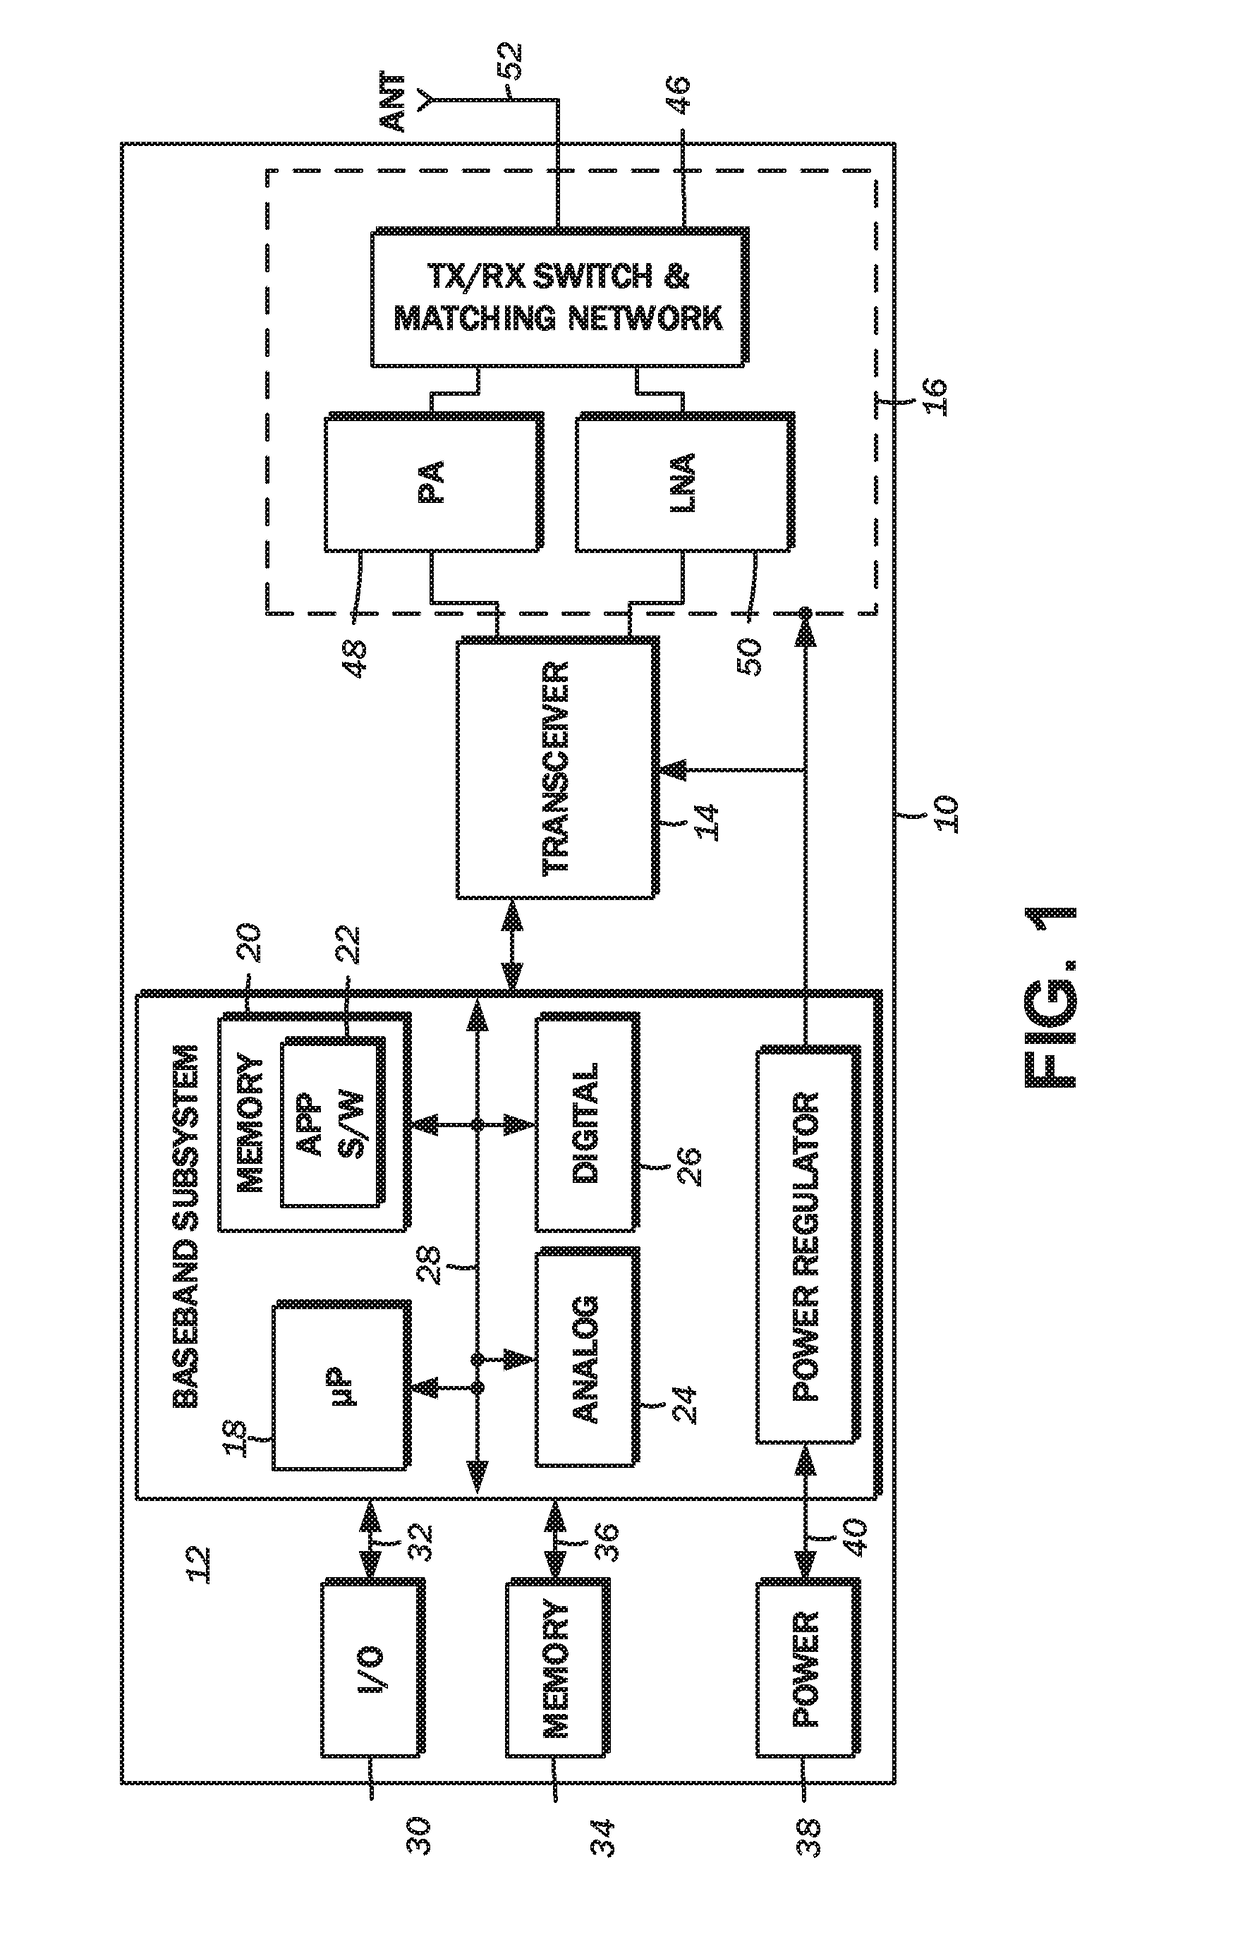 Low dropout voltage regulator for highly linear radio frequency power amplifiers